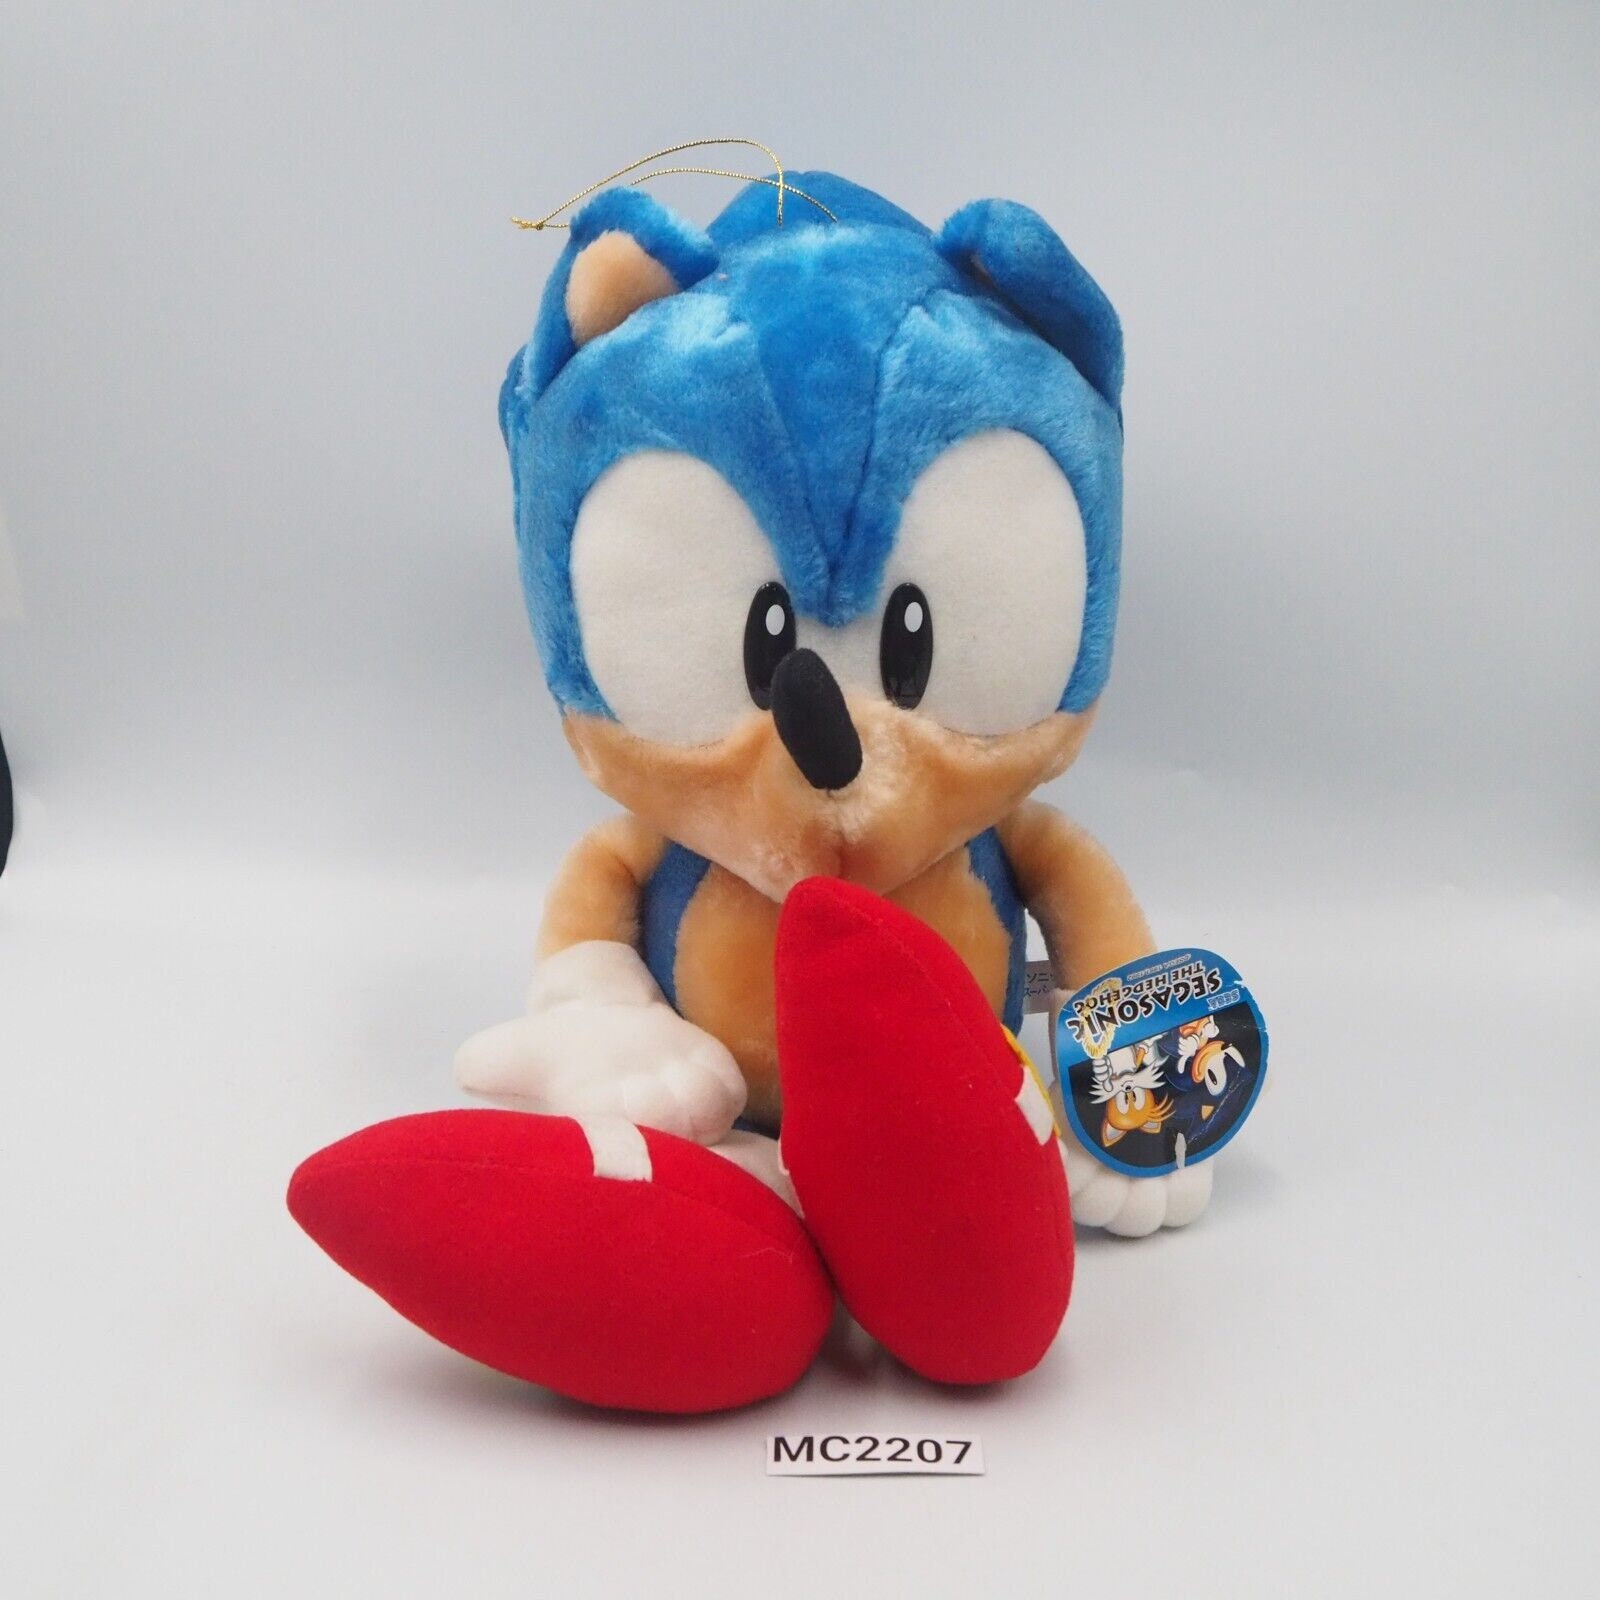 Tails Sonic the Hedgehog Sanei Size M 9.5 Plush Doll Toy Japan Rare